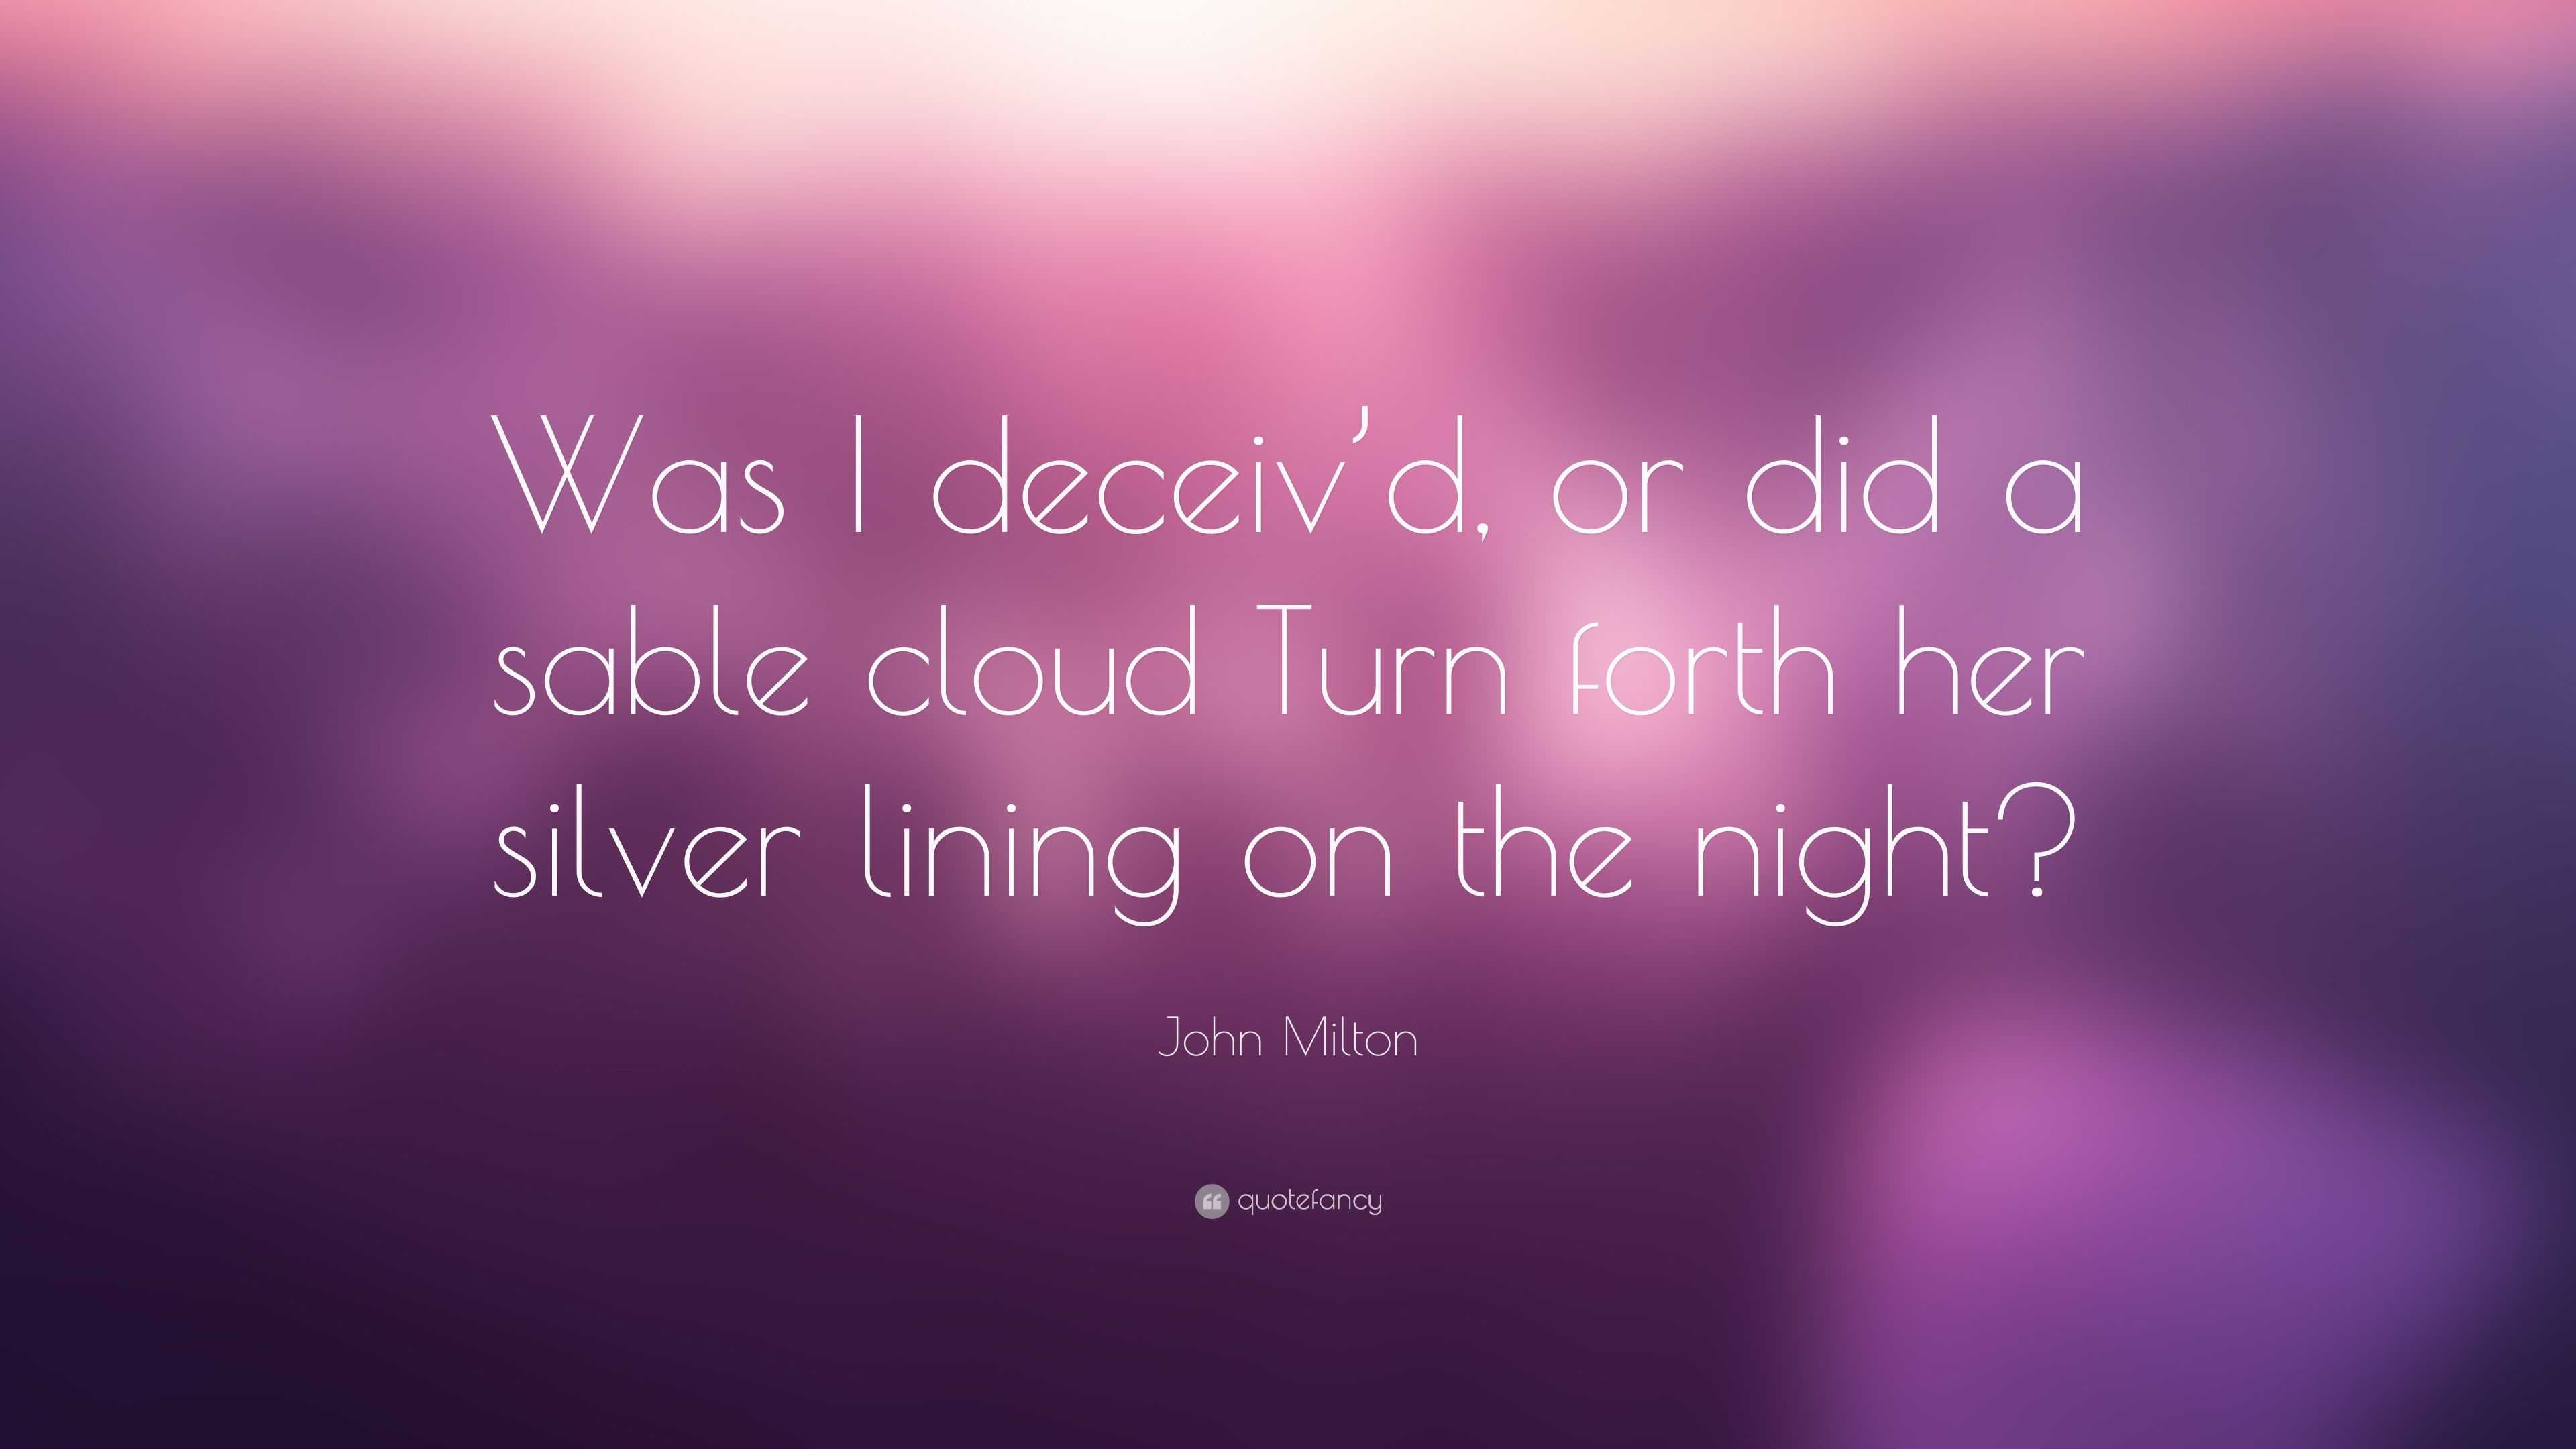 John Milton Quote: “Was I deceiv’d, or did a sable cloud Turn forth her ...